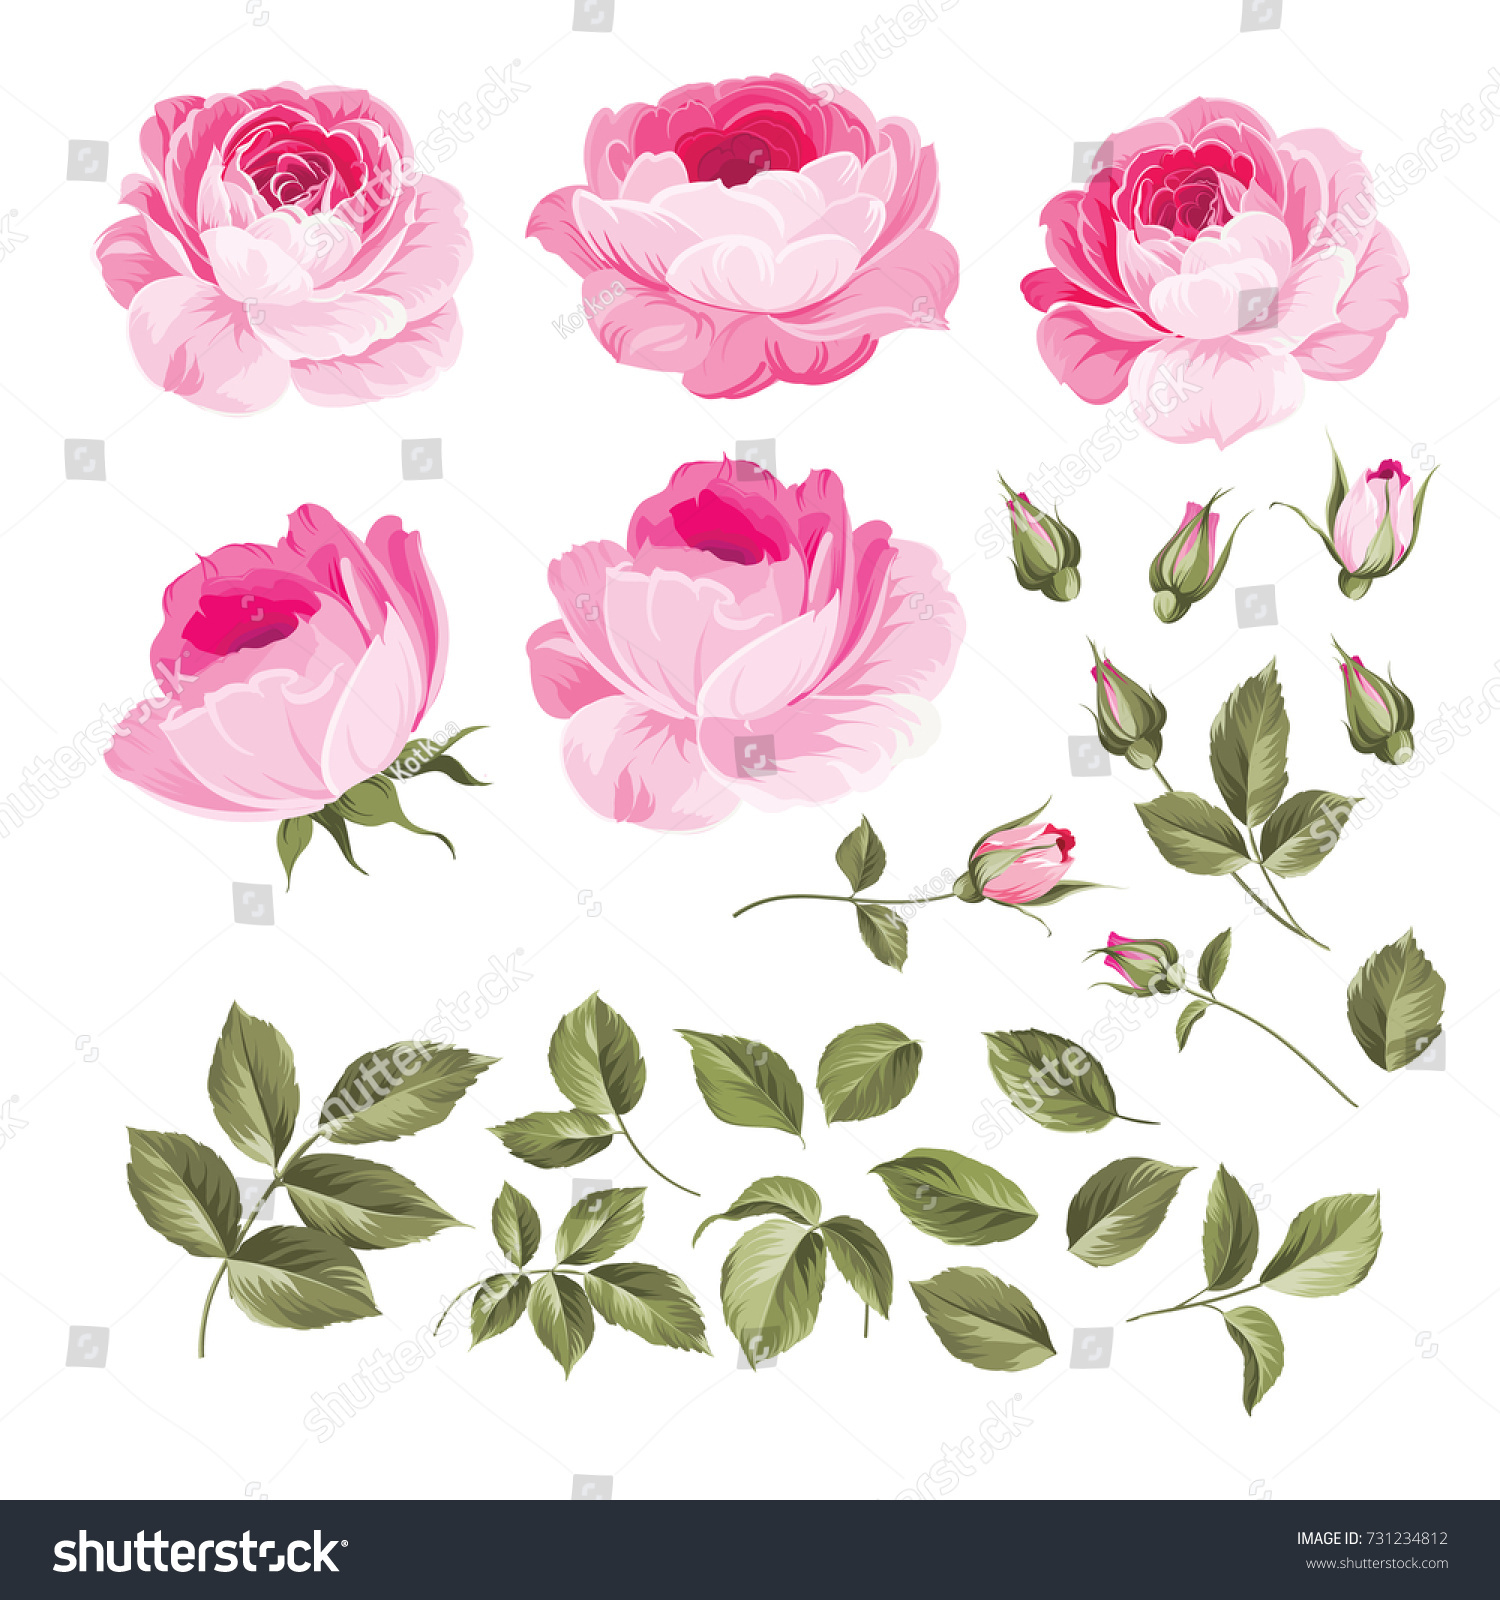 Vintage flowers set overwhite background. Wedding flowers bundle. Flower collection of watercolor detailed hand drawn roses. Vector illustration. #731234812